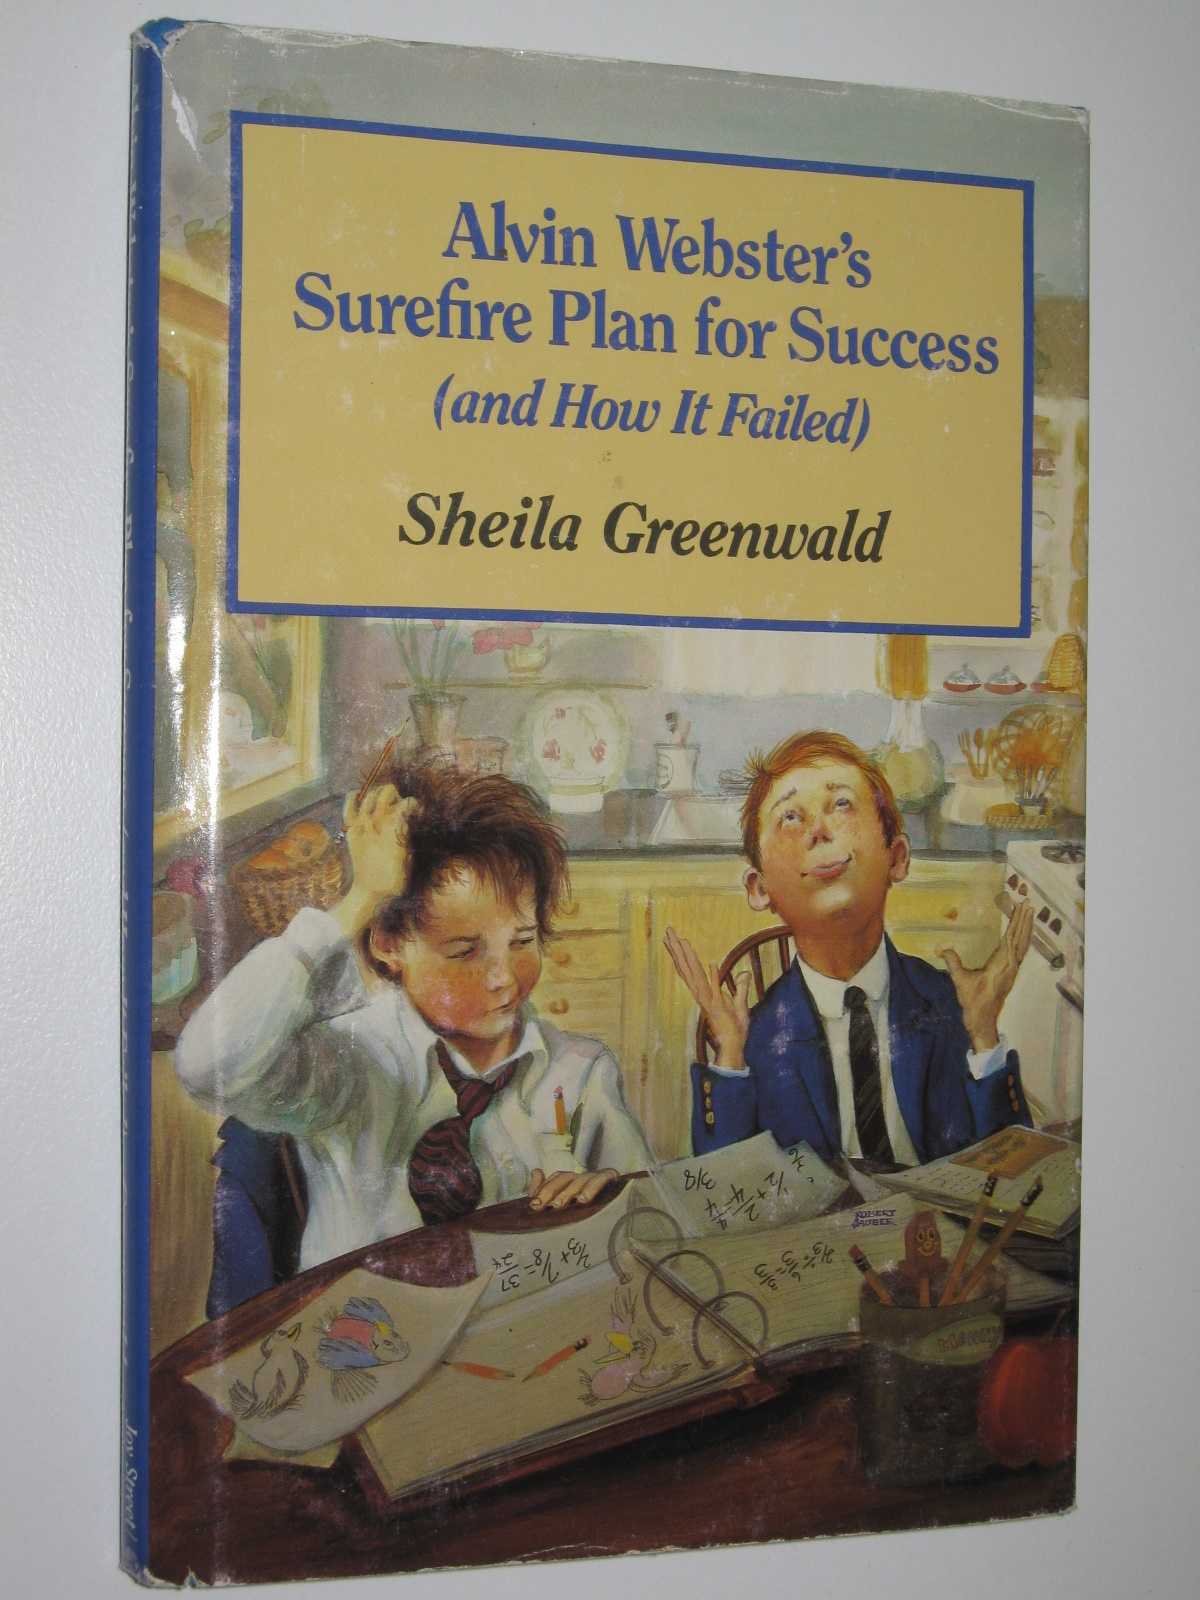 Alvin Webster's Surefire Plan for Success (and How it Failed) - Sheila Greenwald